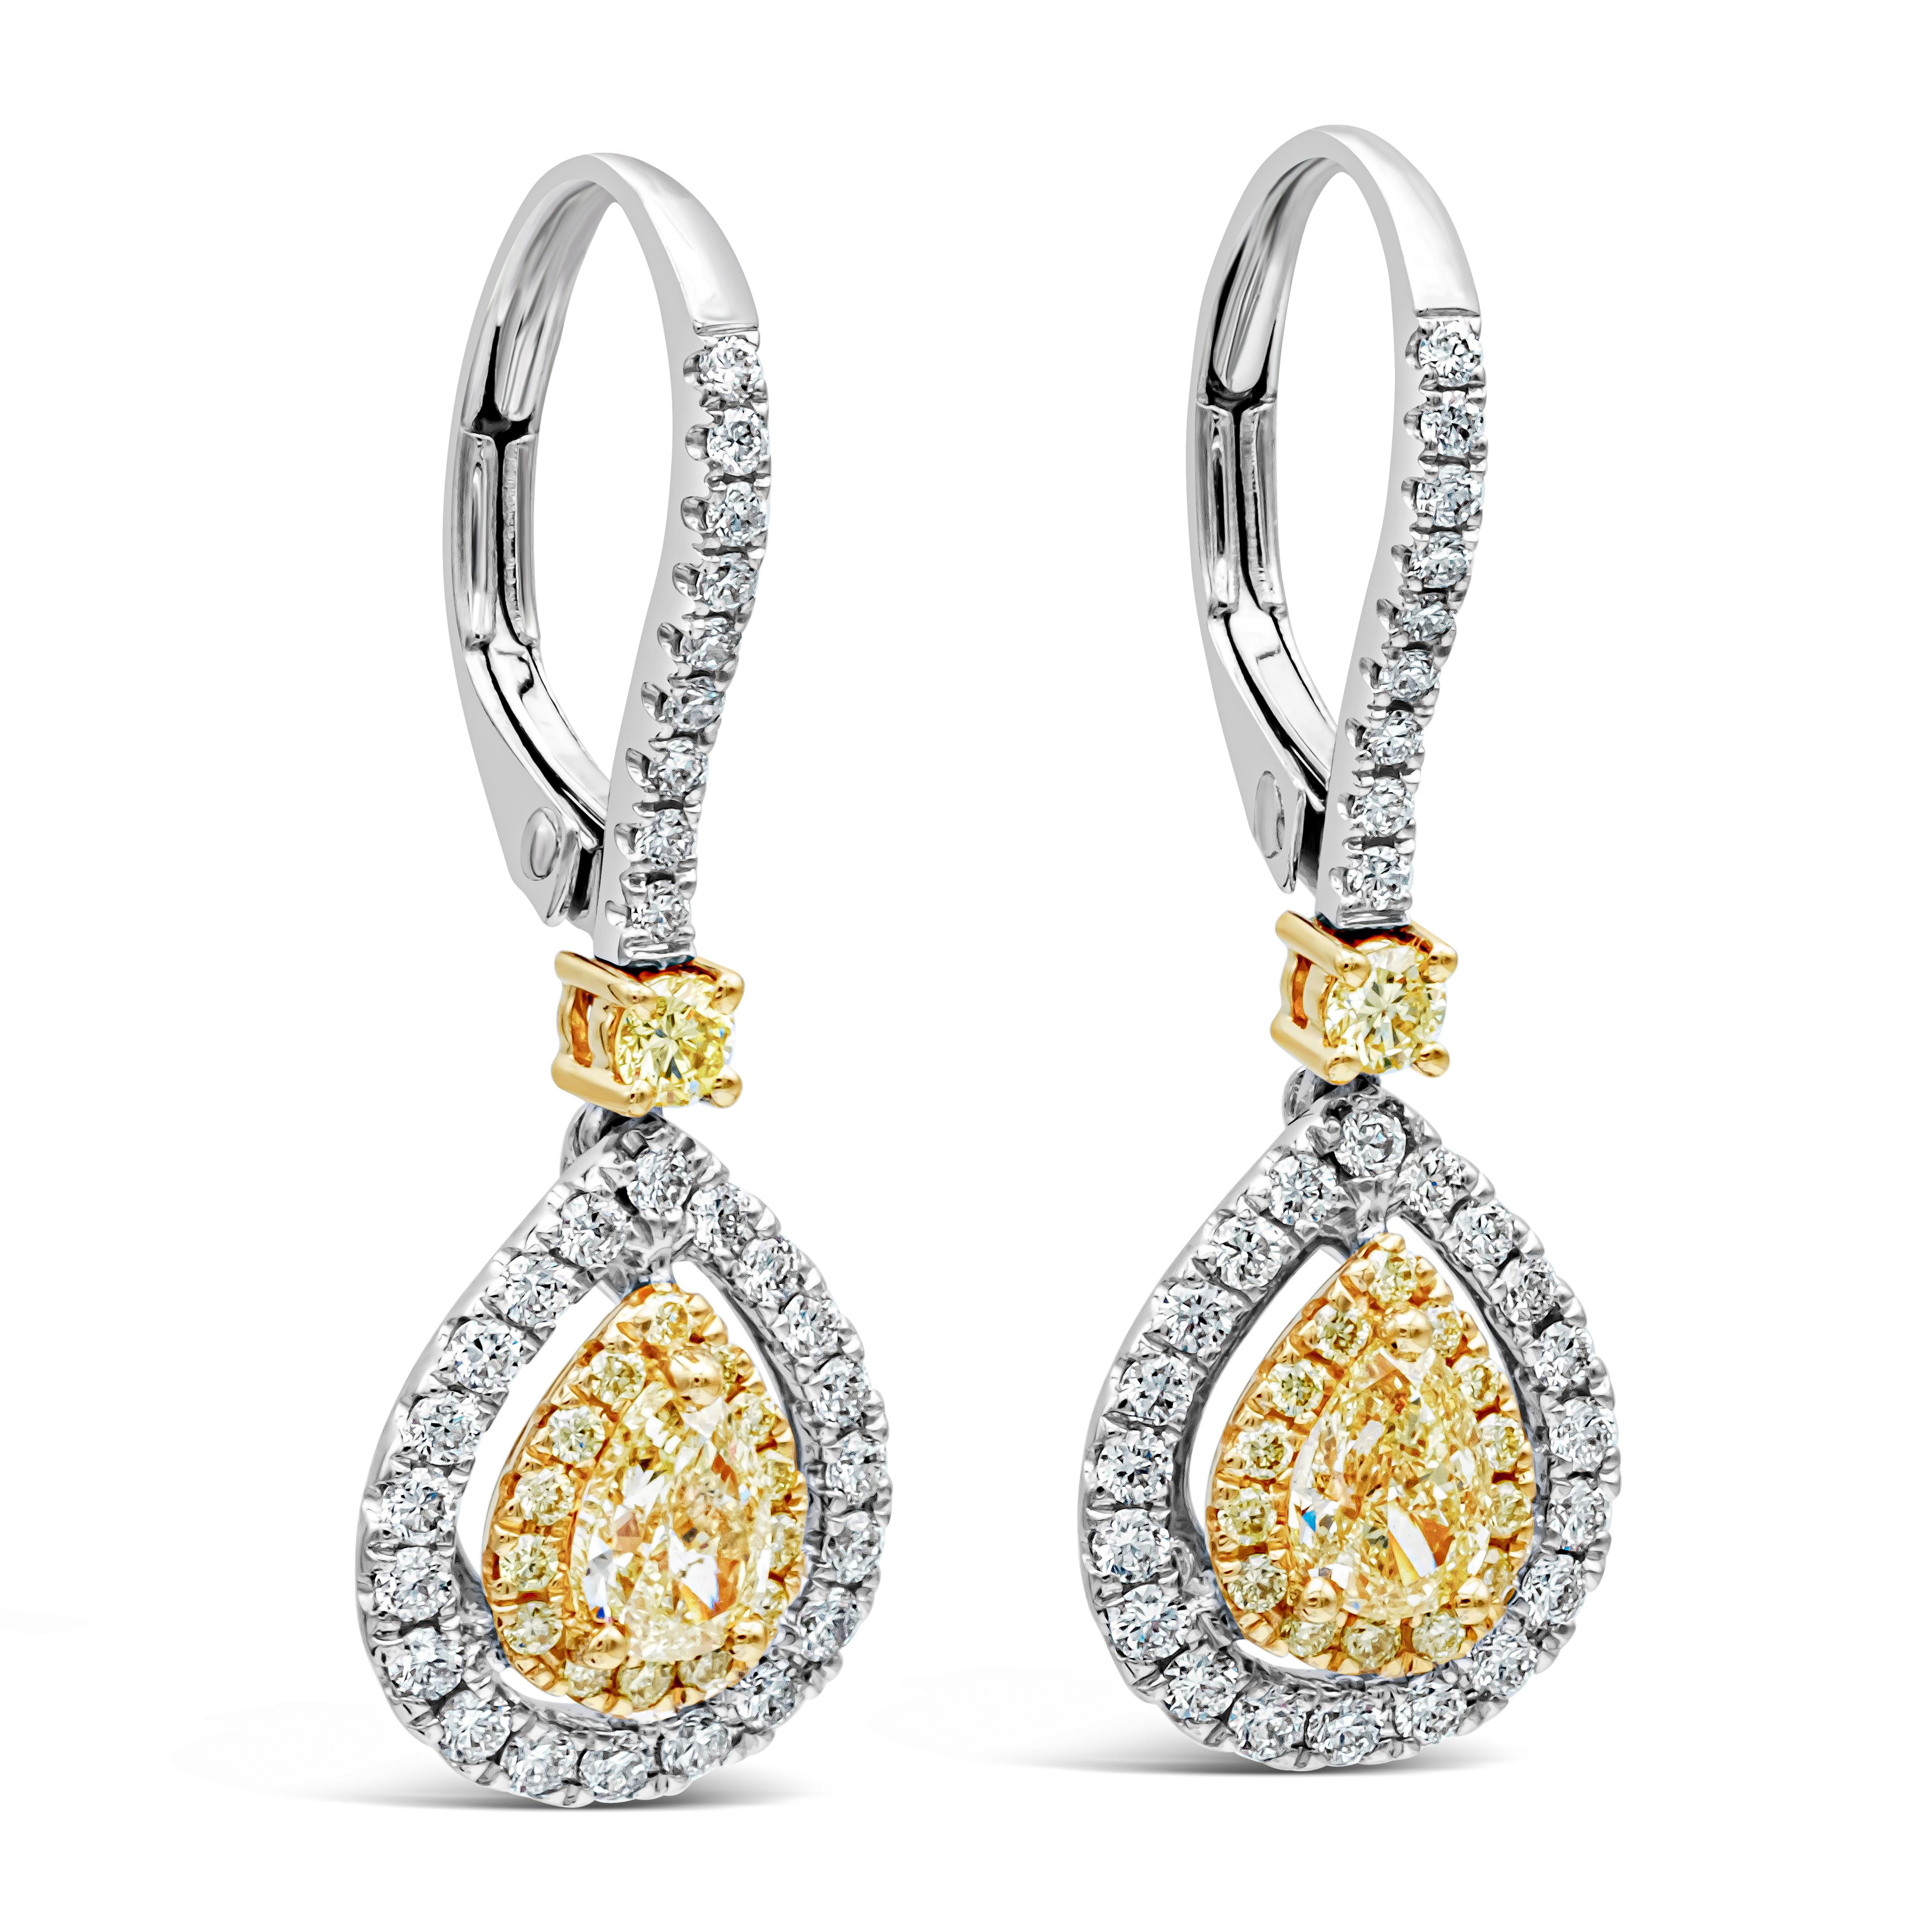 This beautiful pair of earrings features a pear shape yellow diamond surrounded by a round yellow diamond halo with an outer halo of round white diamonds. Hanging from a diamond encrusted lever-back with a single round yellow diamond in between.